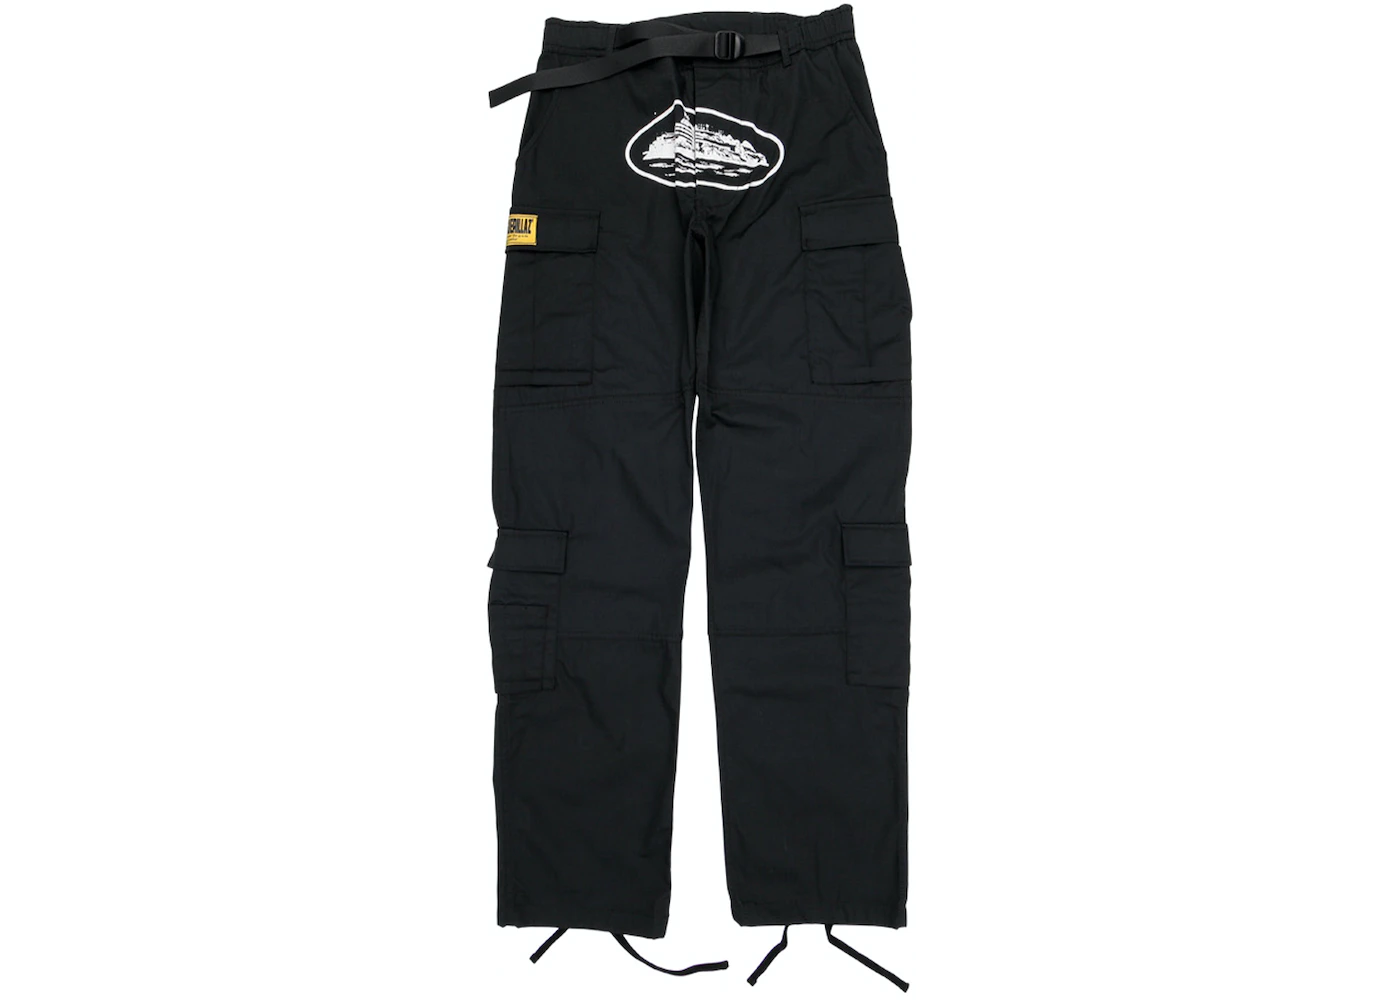 The Real CRTZ Cargo Pants - A Guide to Authenticity